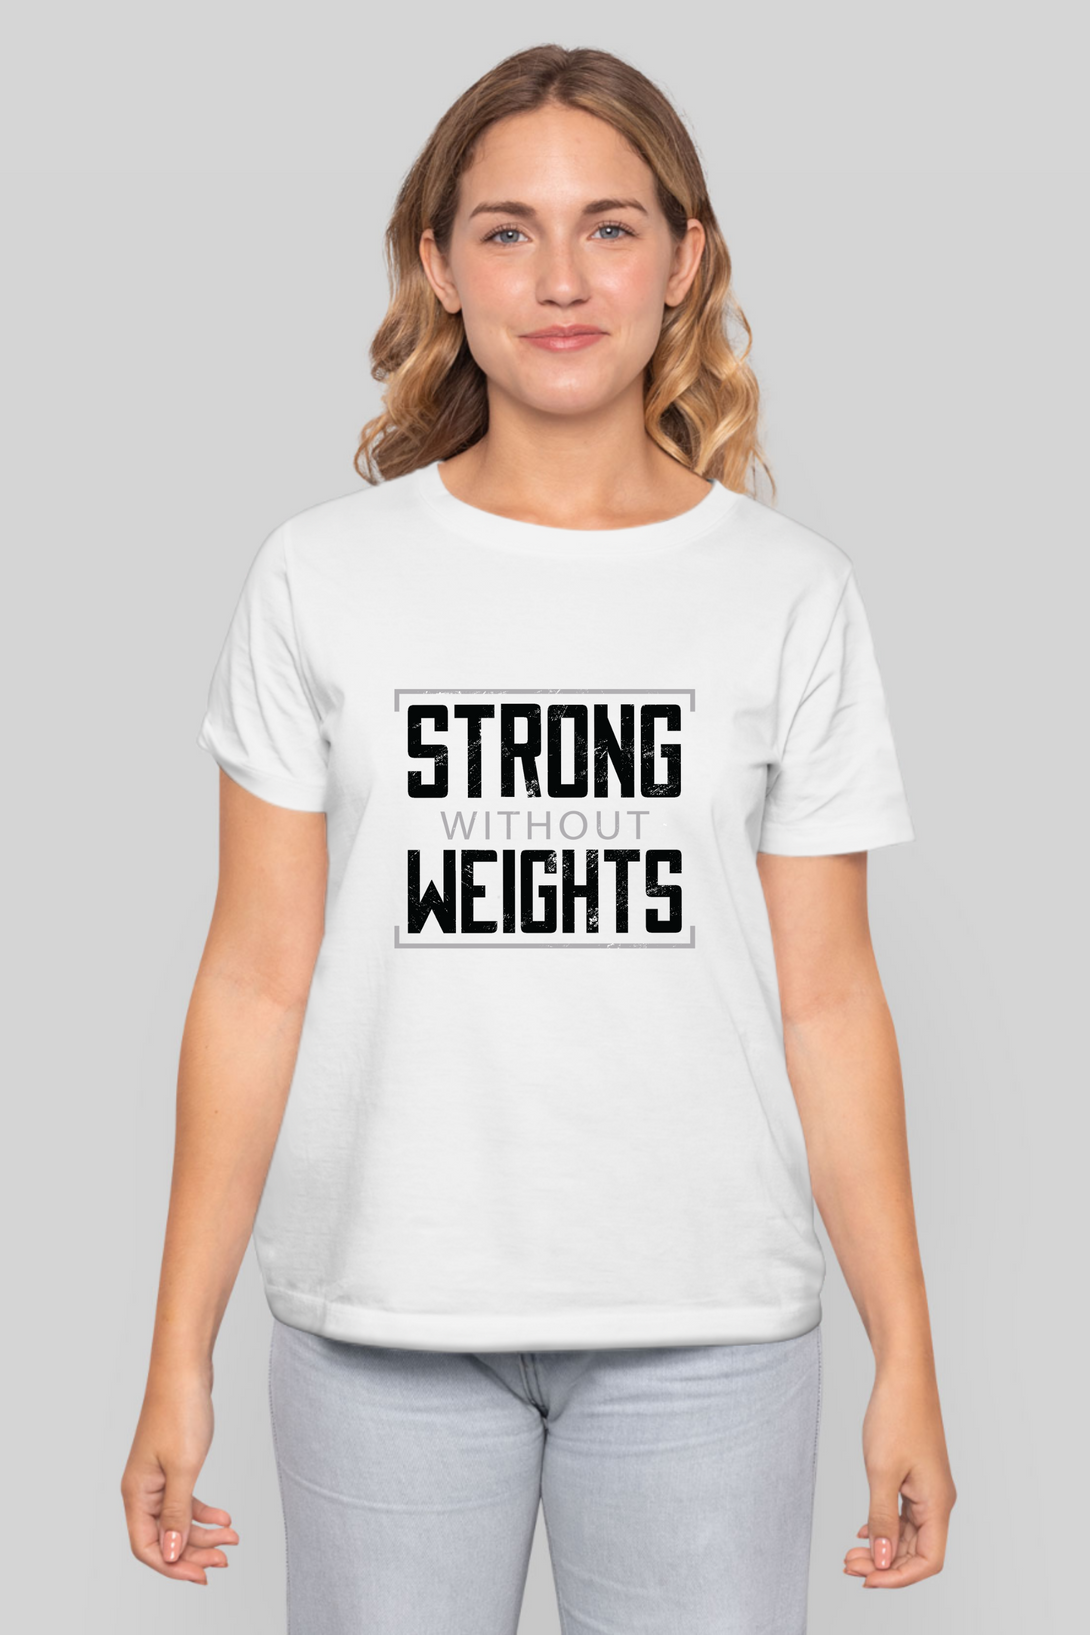 Strong Without Weights Printed T-Shirt For Women - WowWaves - 8